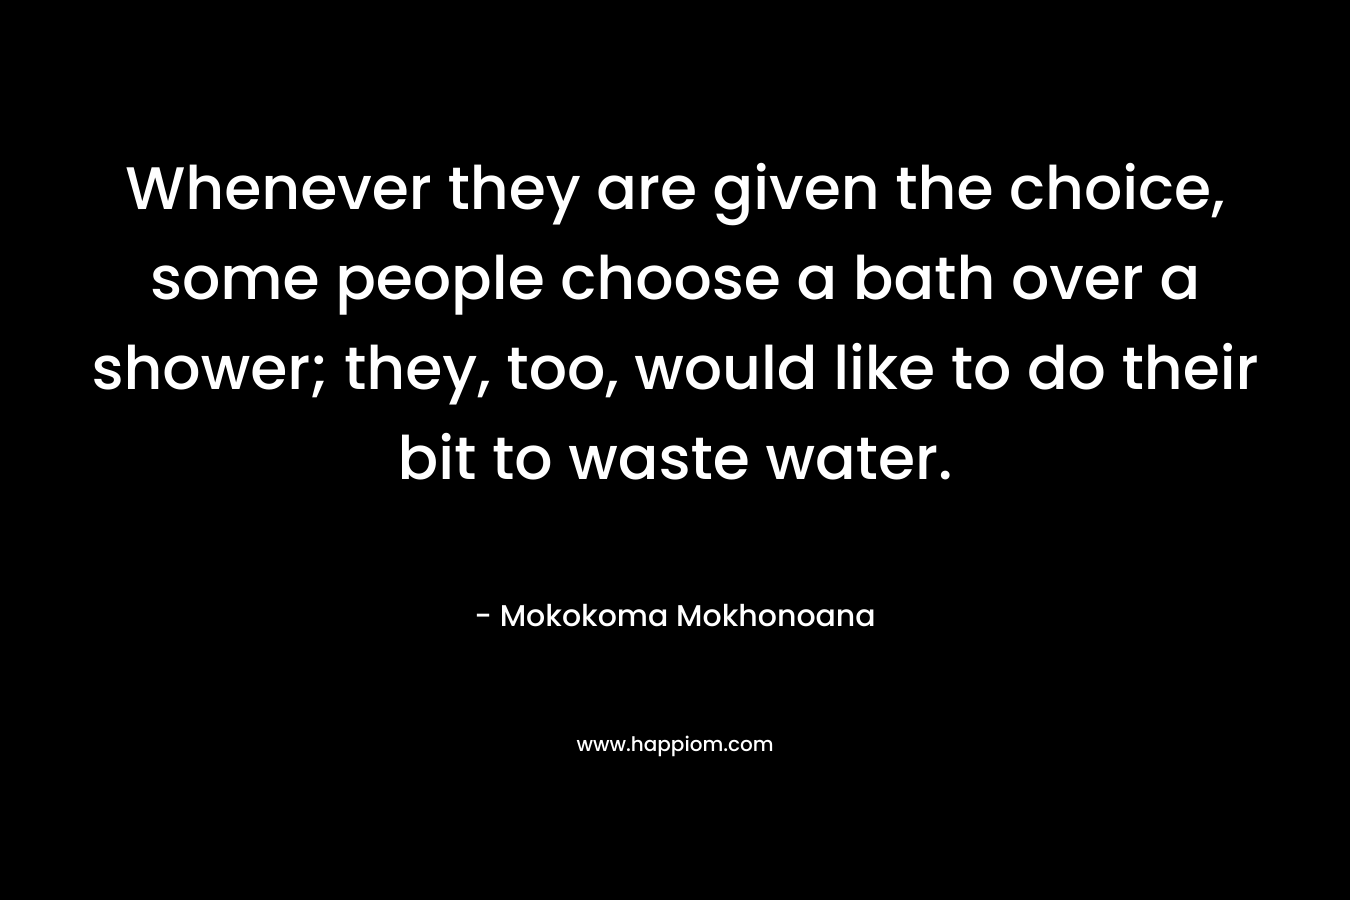 Whenever they are given the choice, some people choose a bath over a shower; they, too, would like to do their bit to waste water.